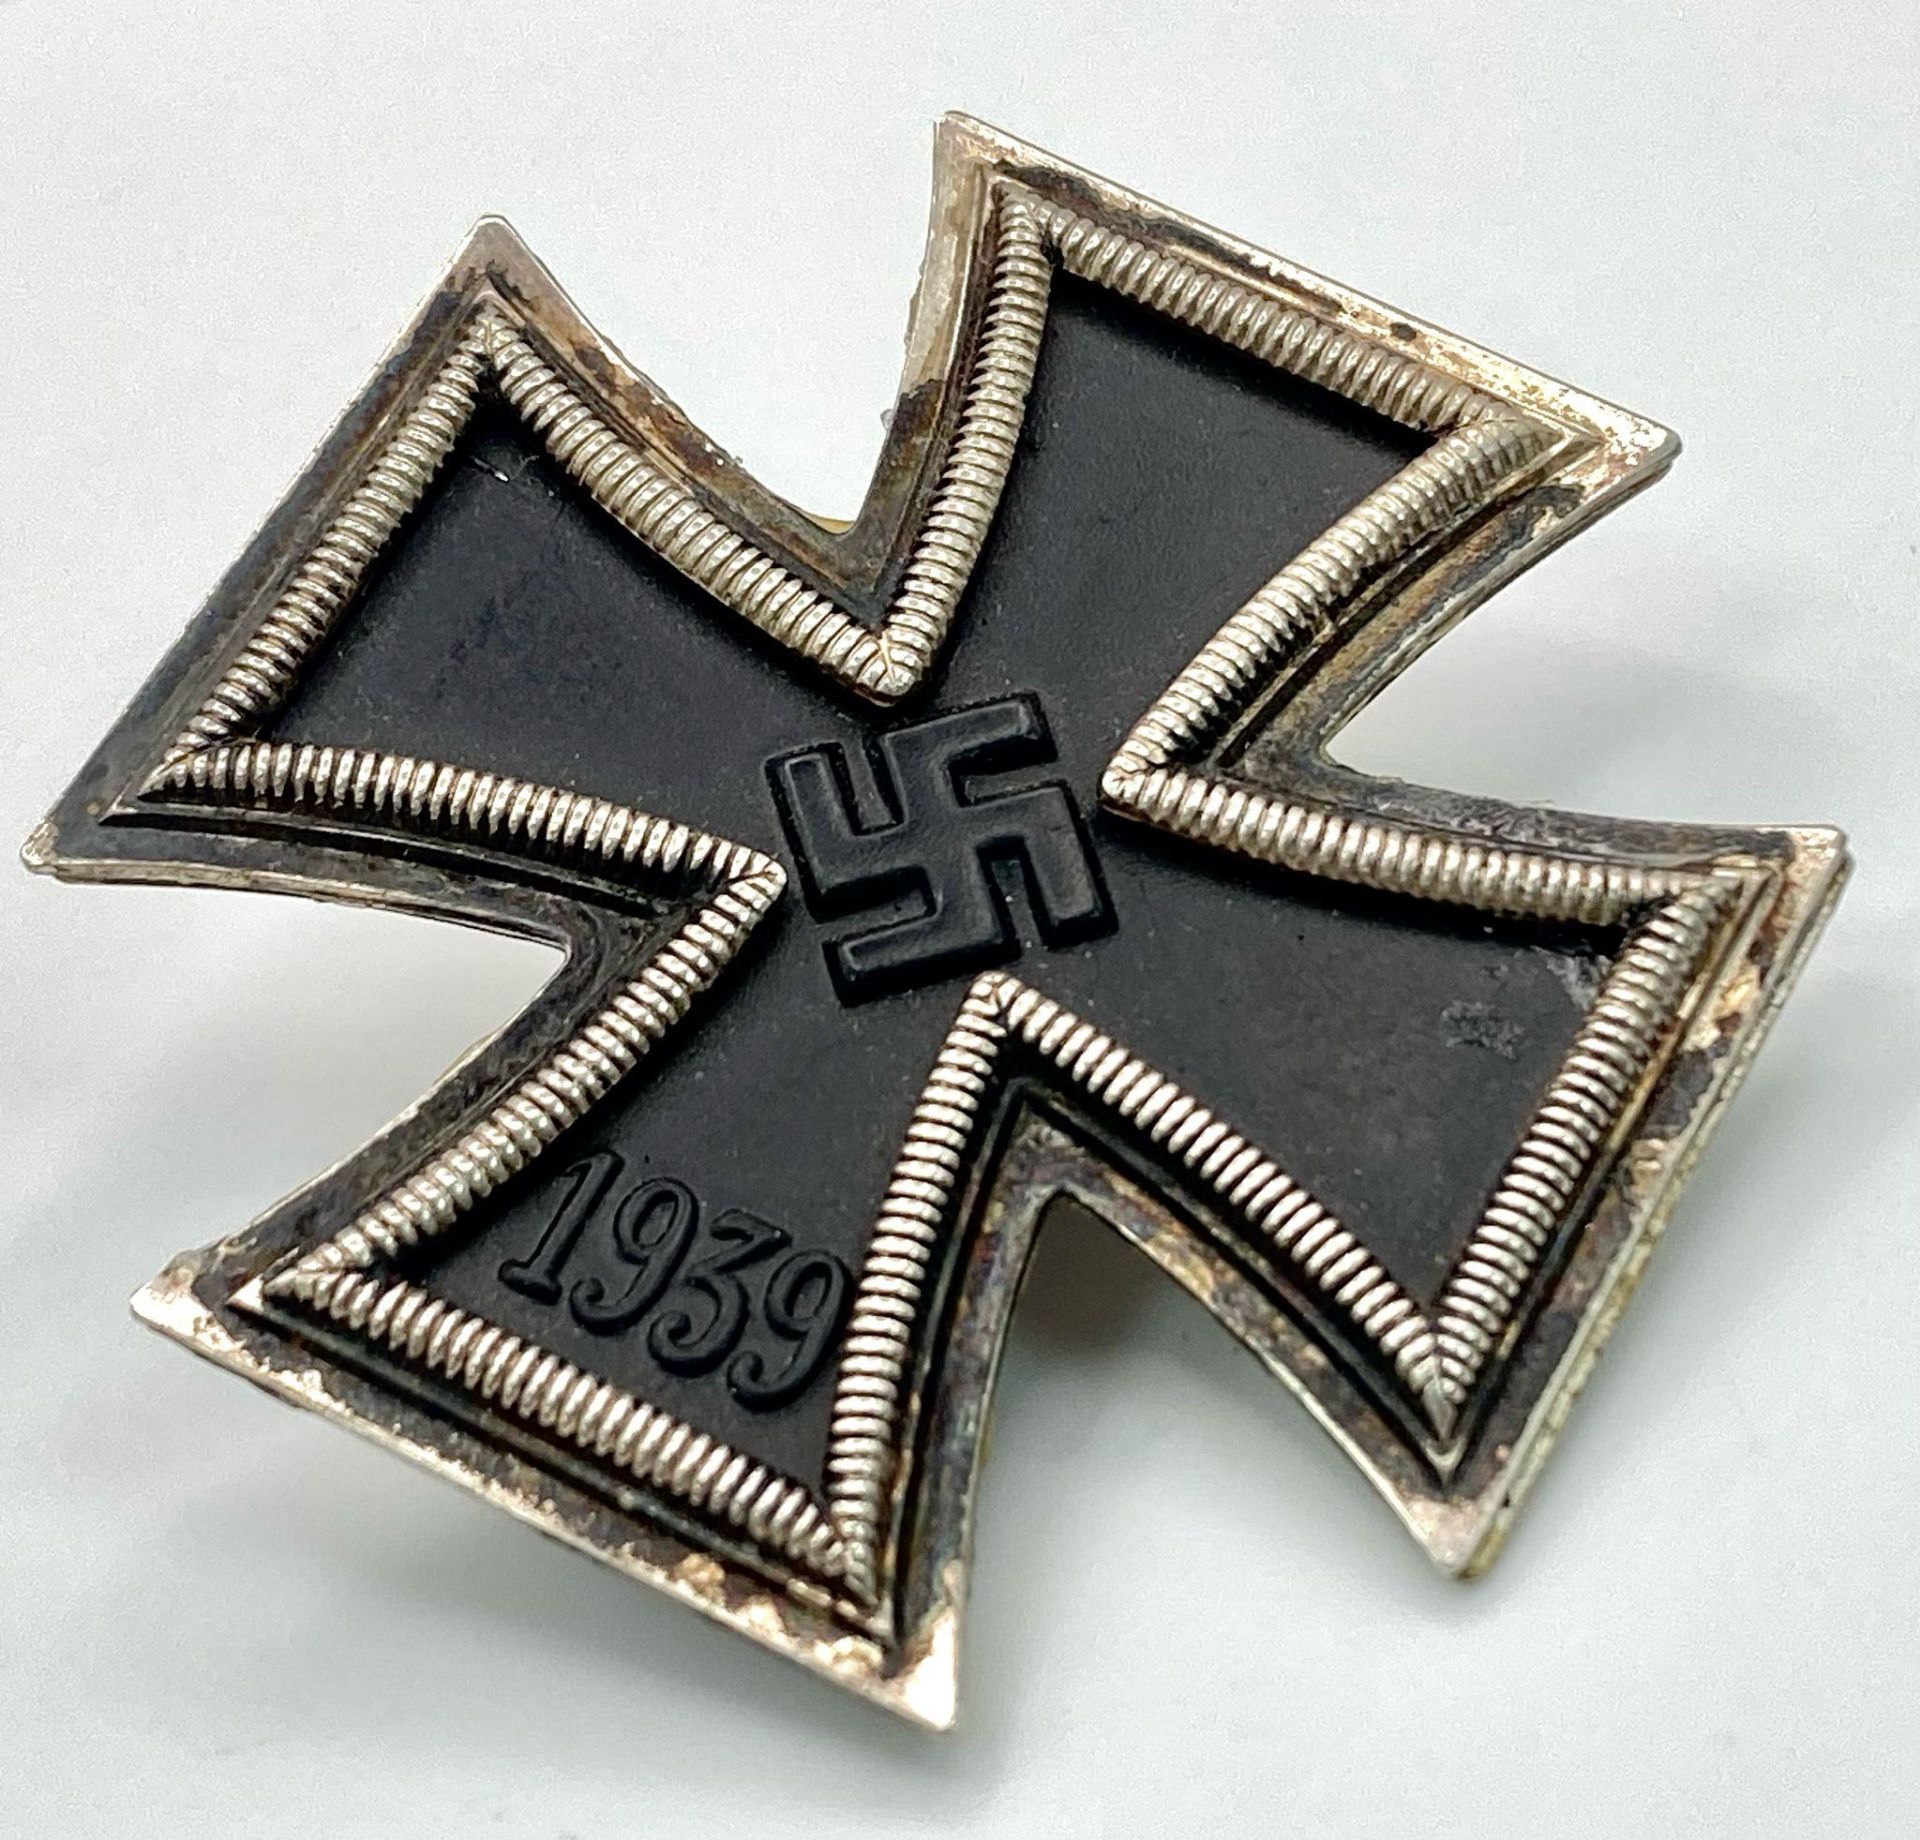 WW2 German Iron Cross 1st Class. 3 part construction with an iron core. - Image 2 of 3